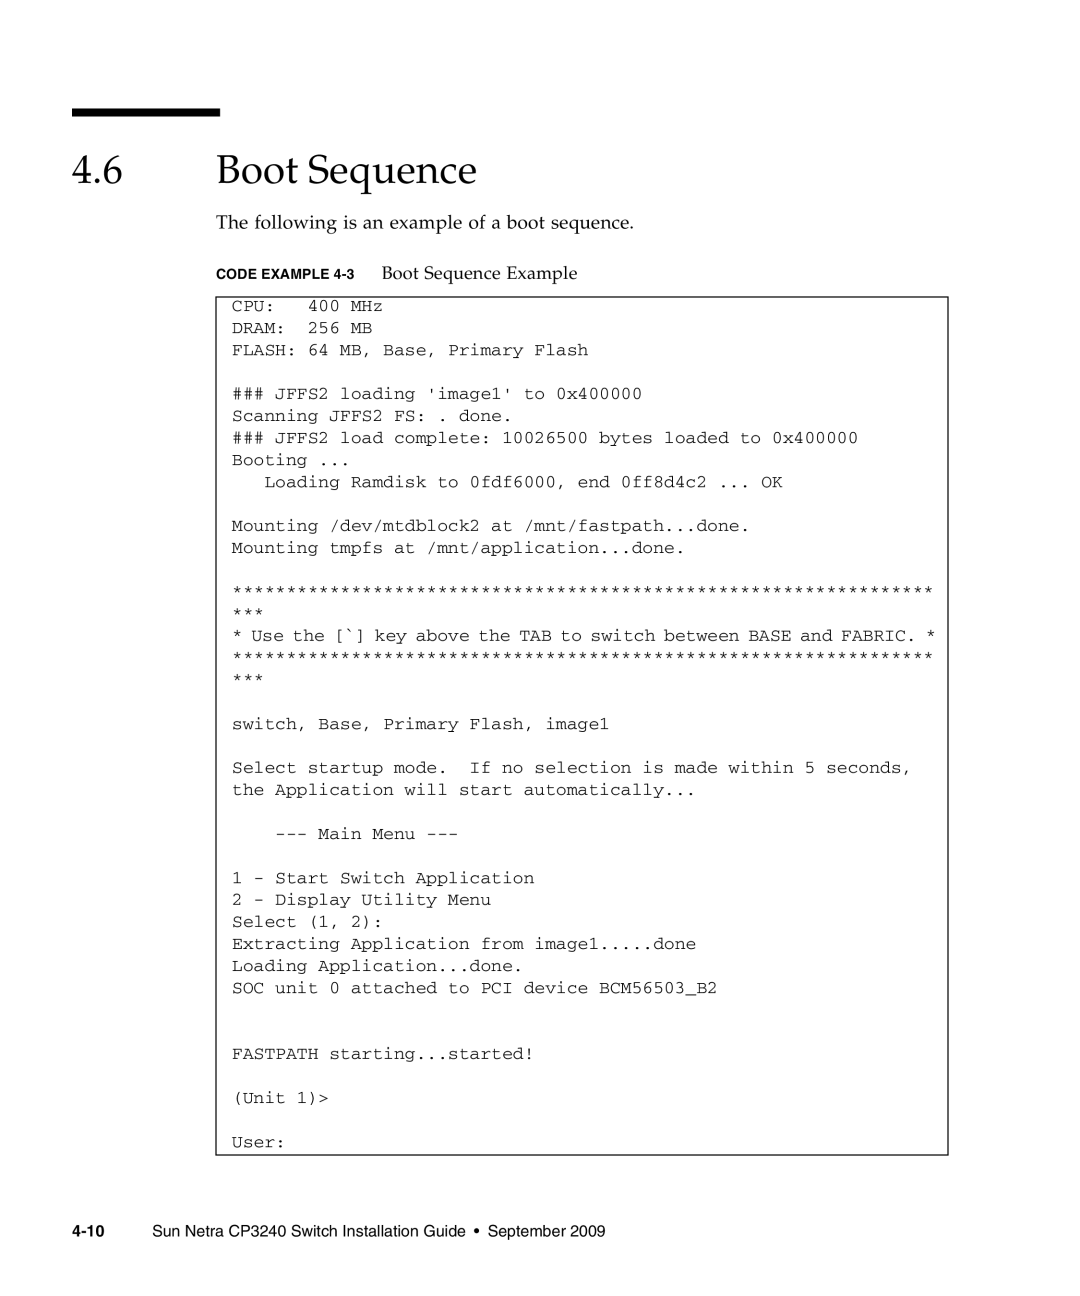 Sun Microsystems CP3240 manual Boot Sequence, The following is an example of a boot sequence 